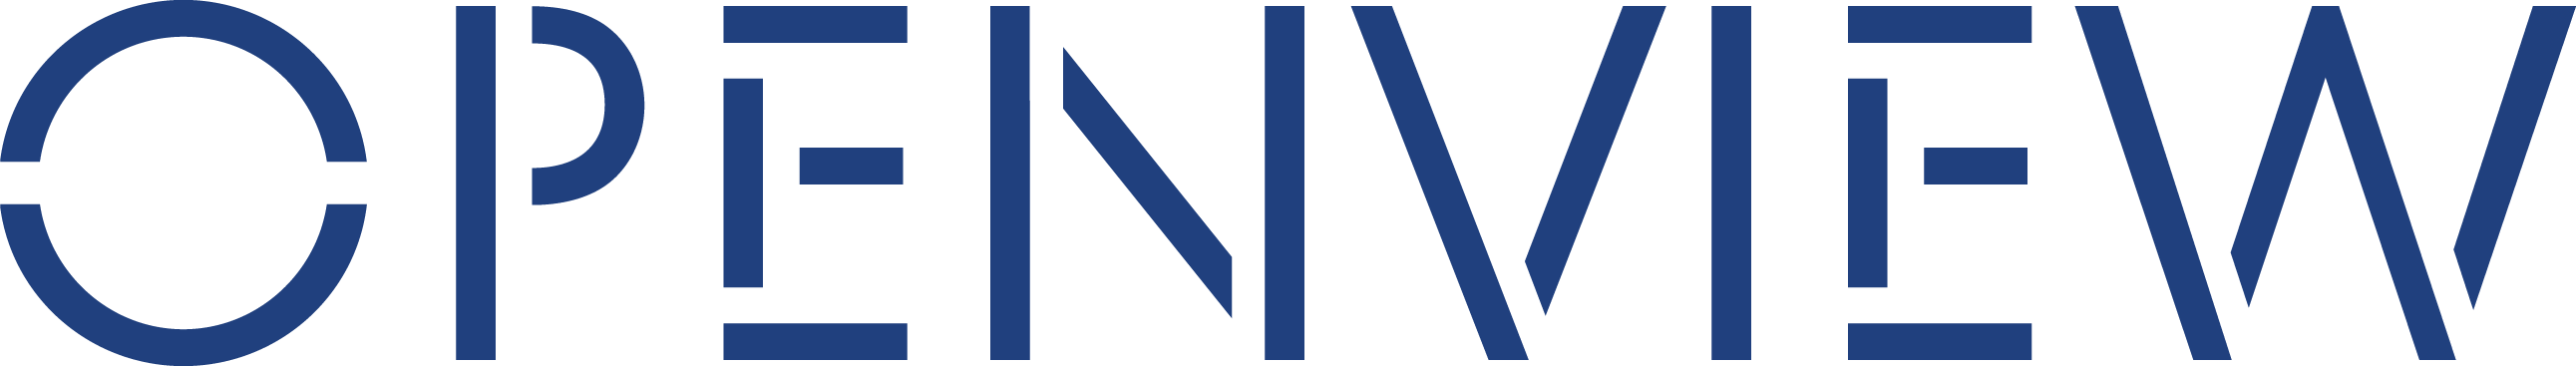 openview logo